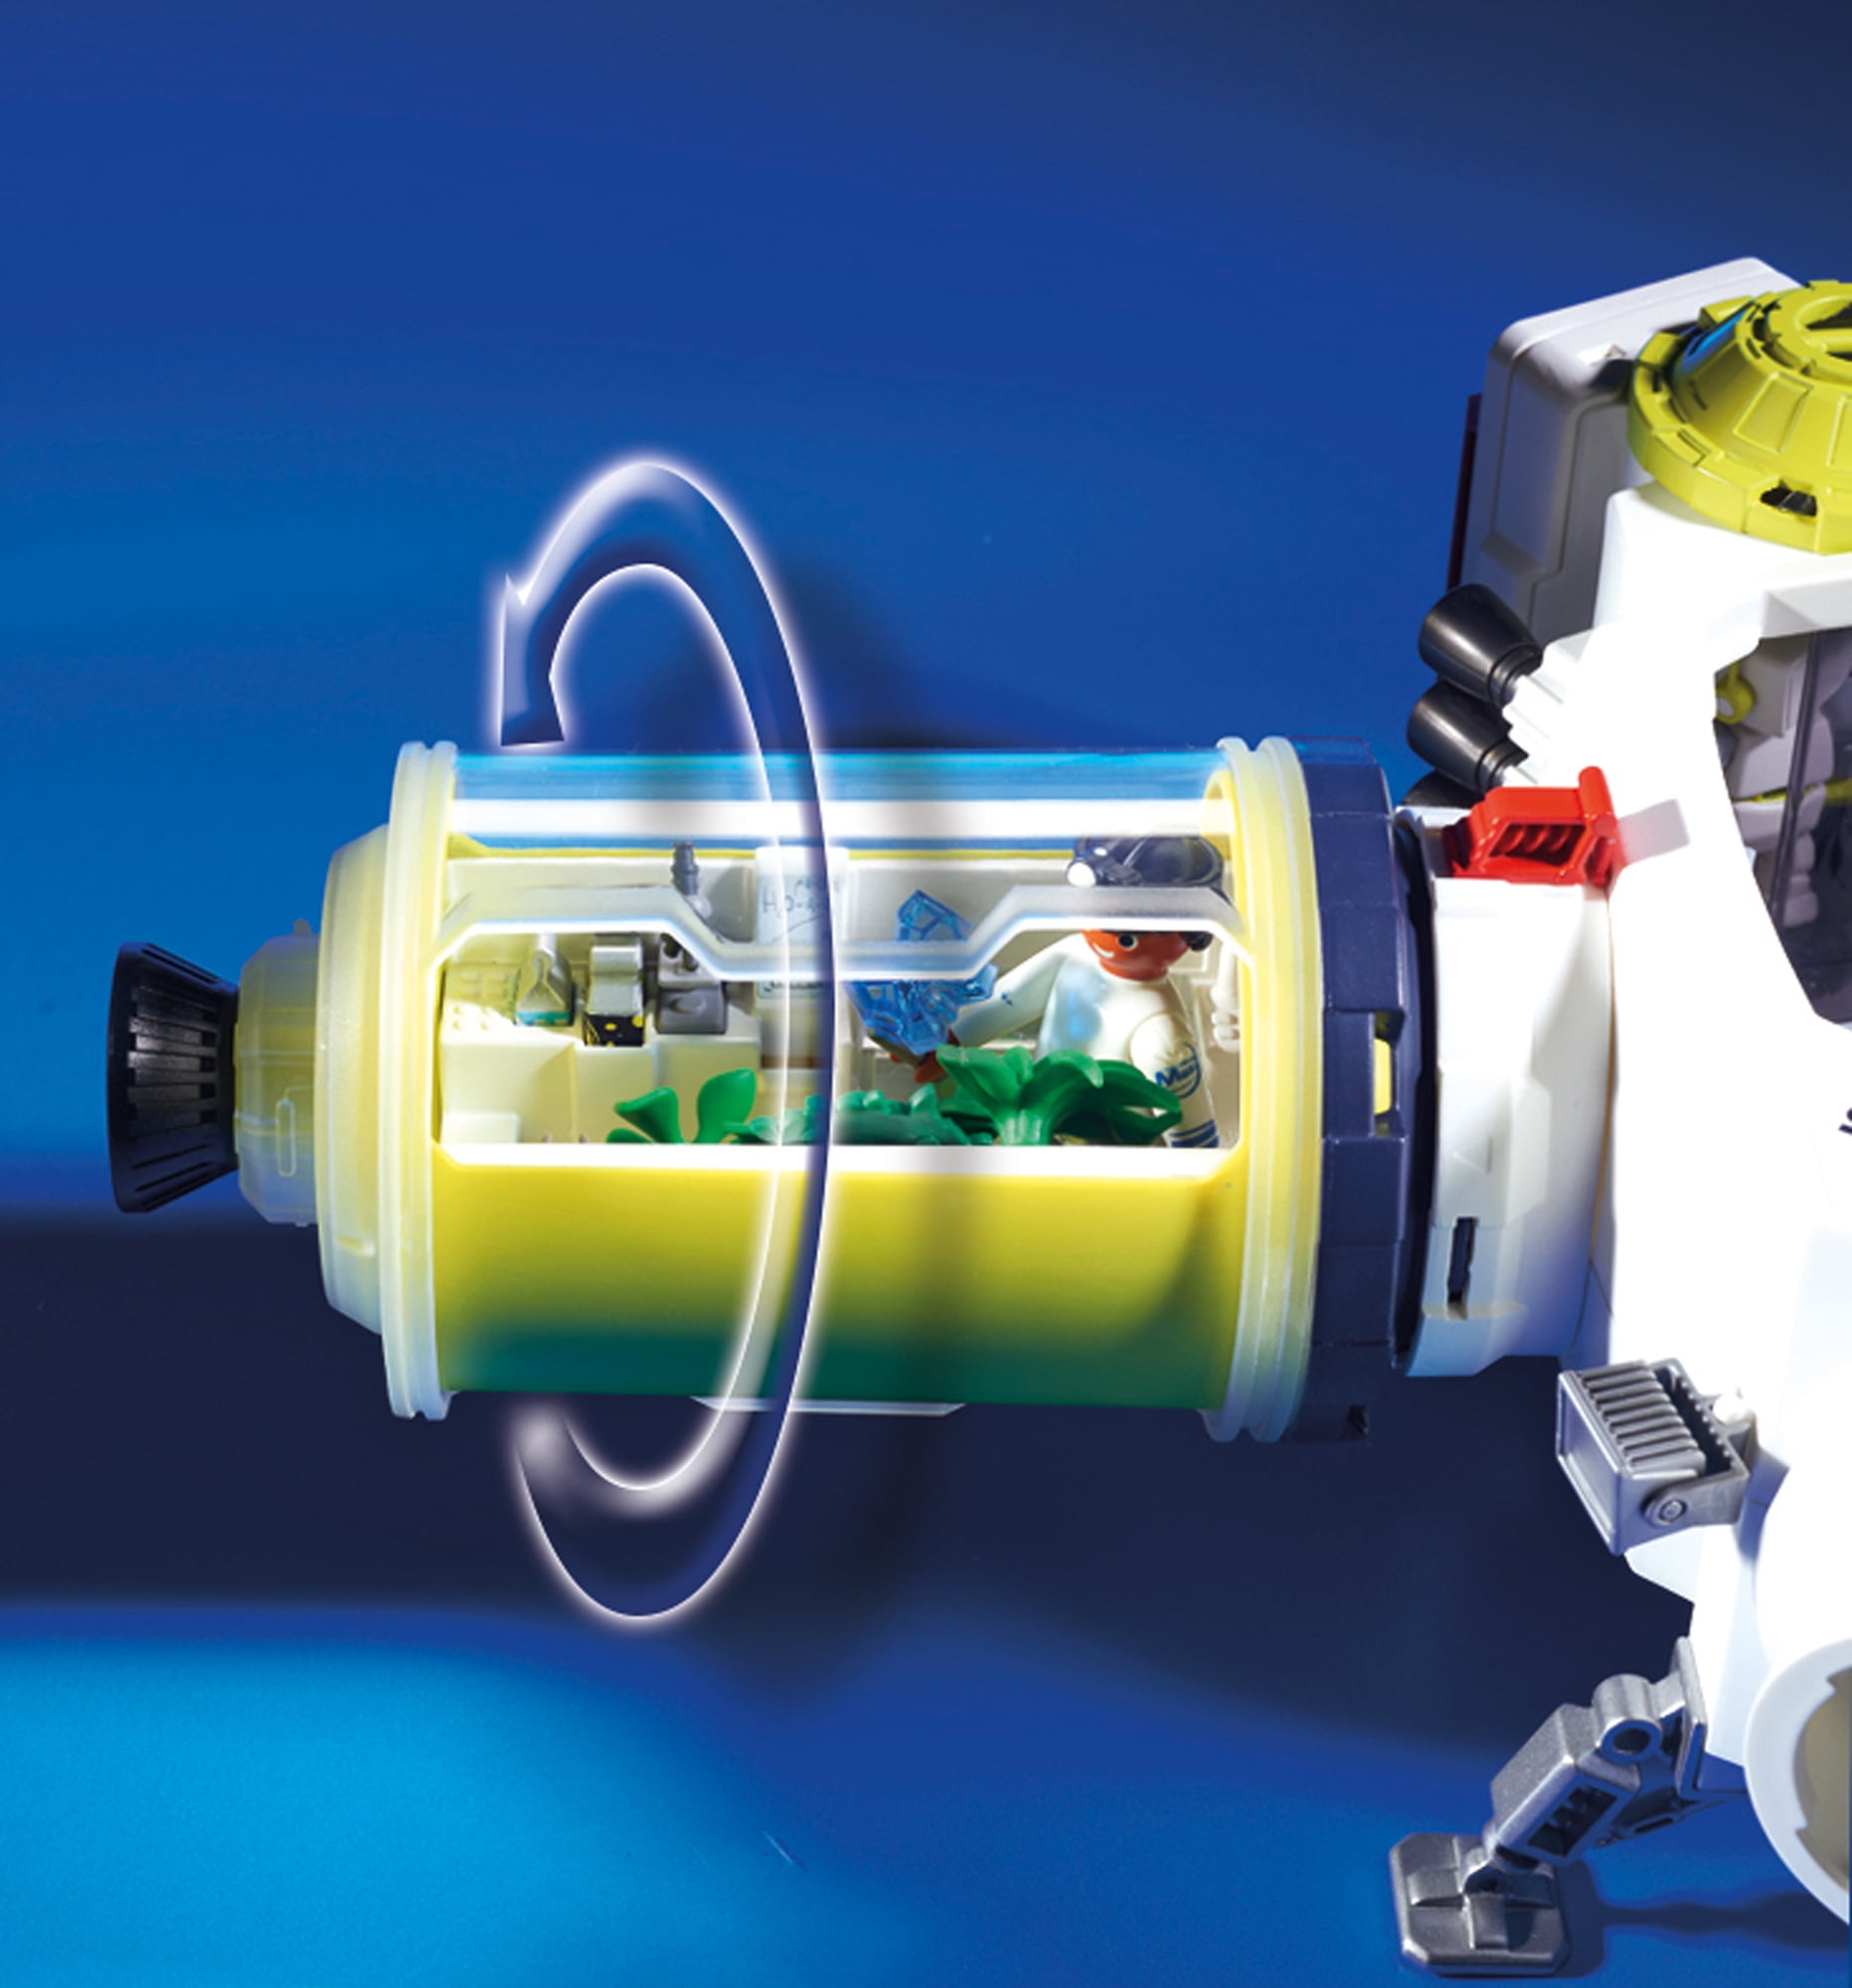 Playmobil Space Station With The Radar Dish – Ron's Rescued Treasures